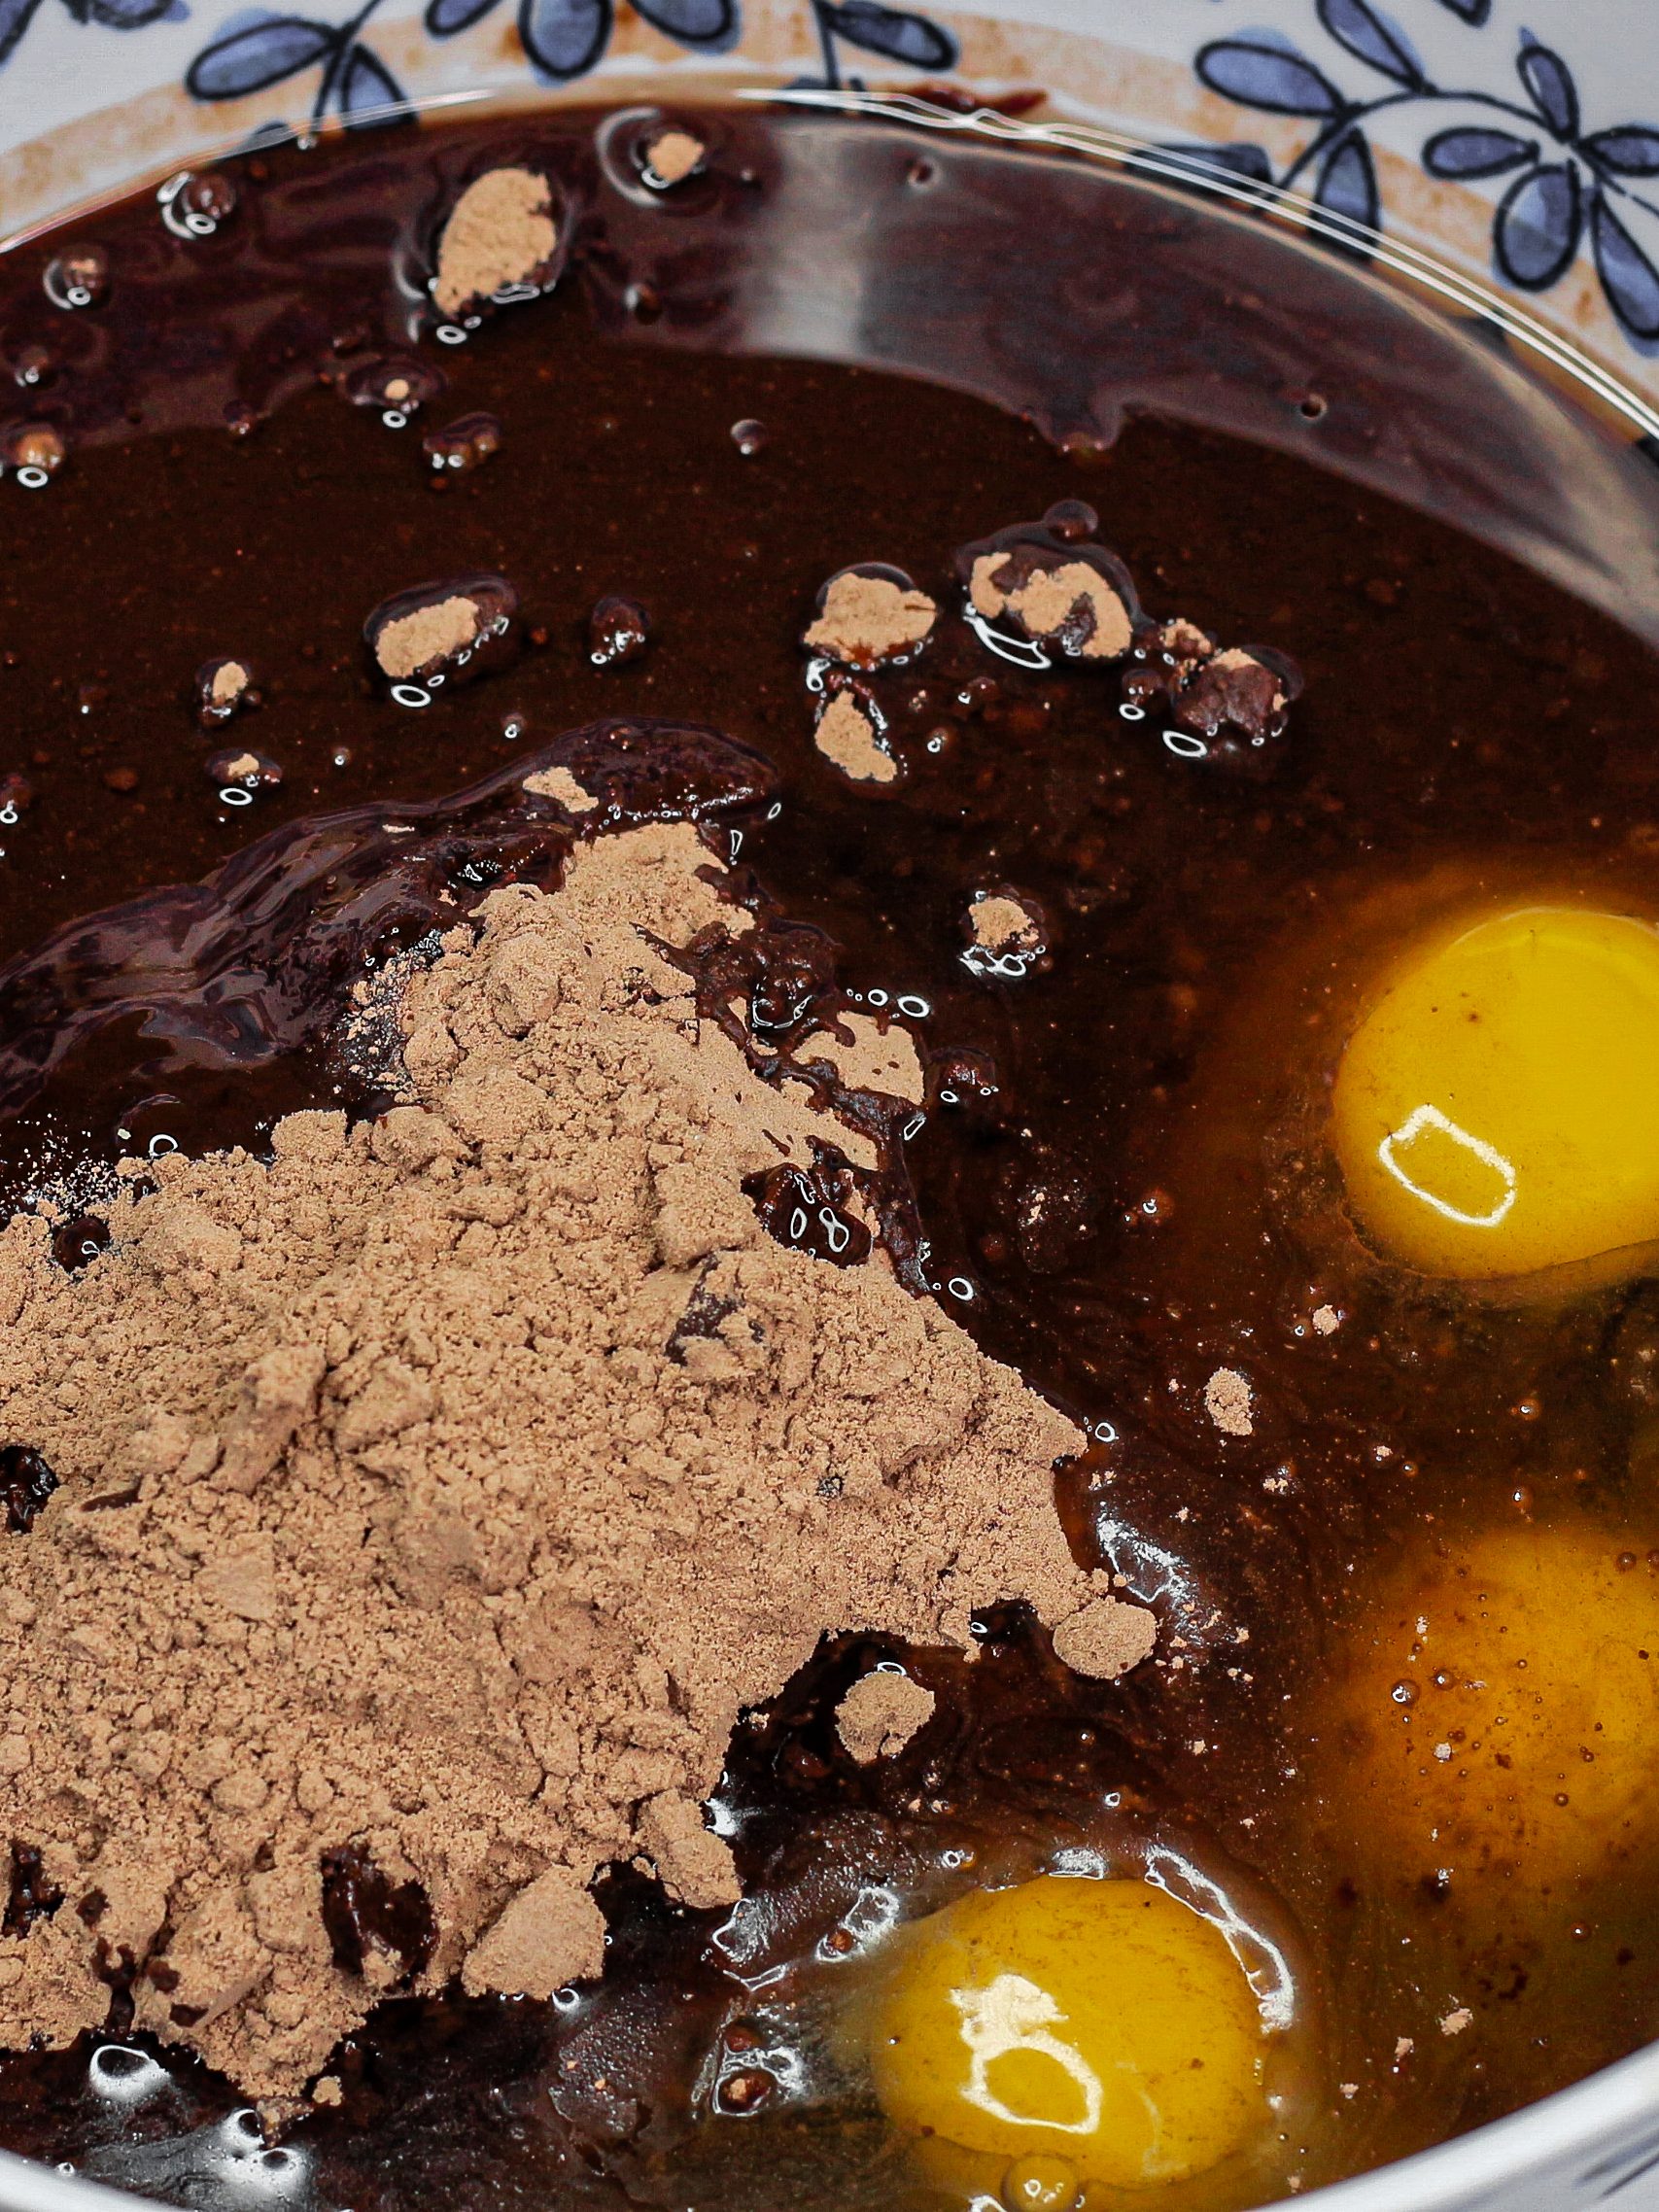 Using a large bowl, mix together the brownie mix, 1 jar of hot fudge sauce, 3 large eggs, and oil until combined.